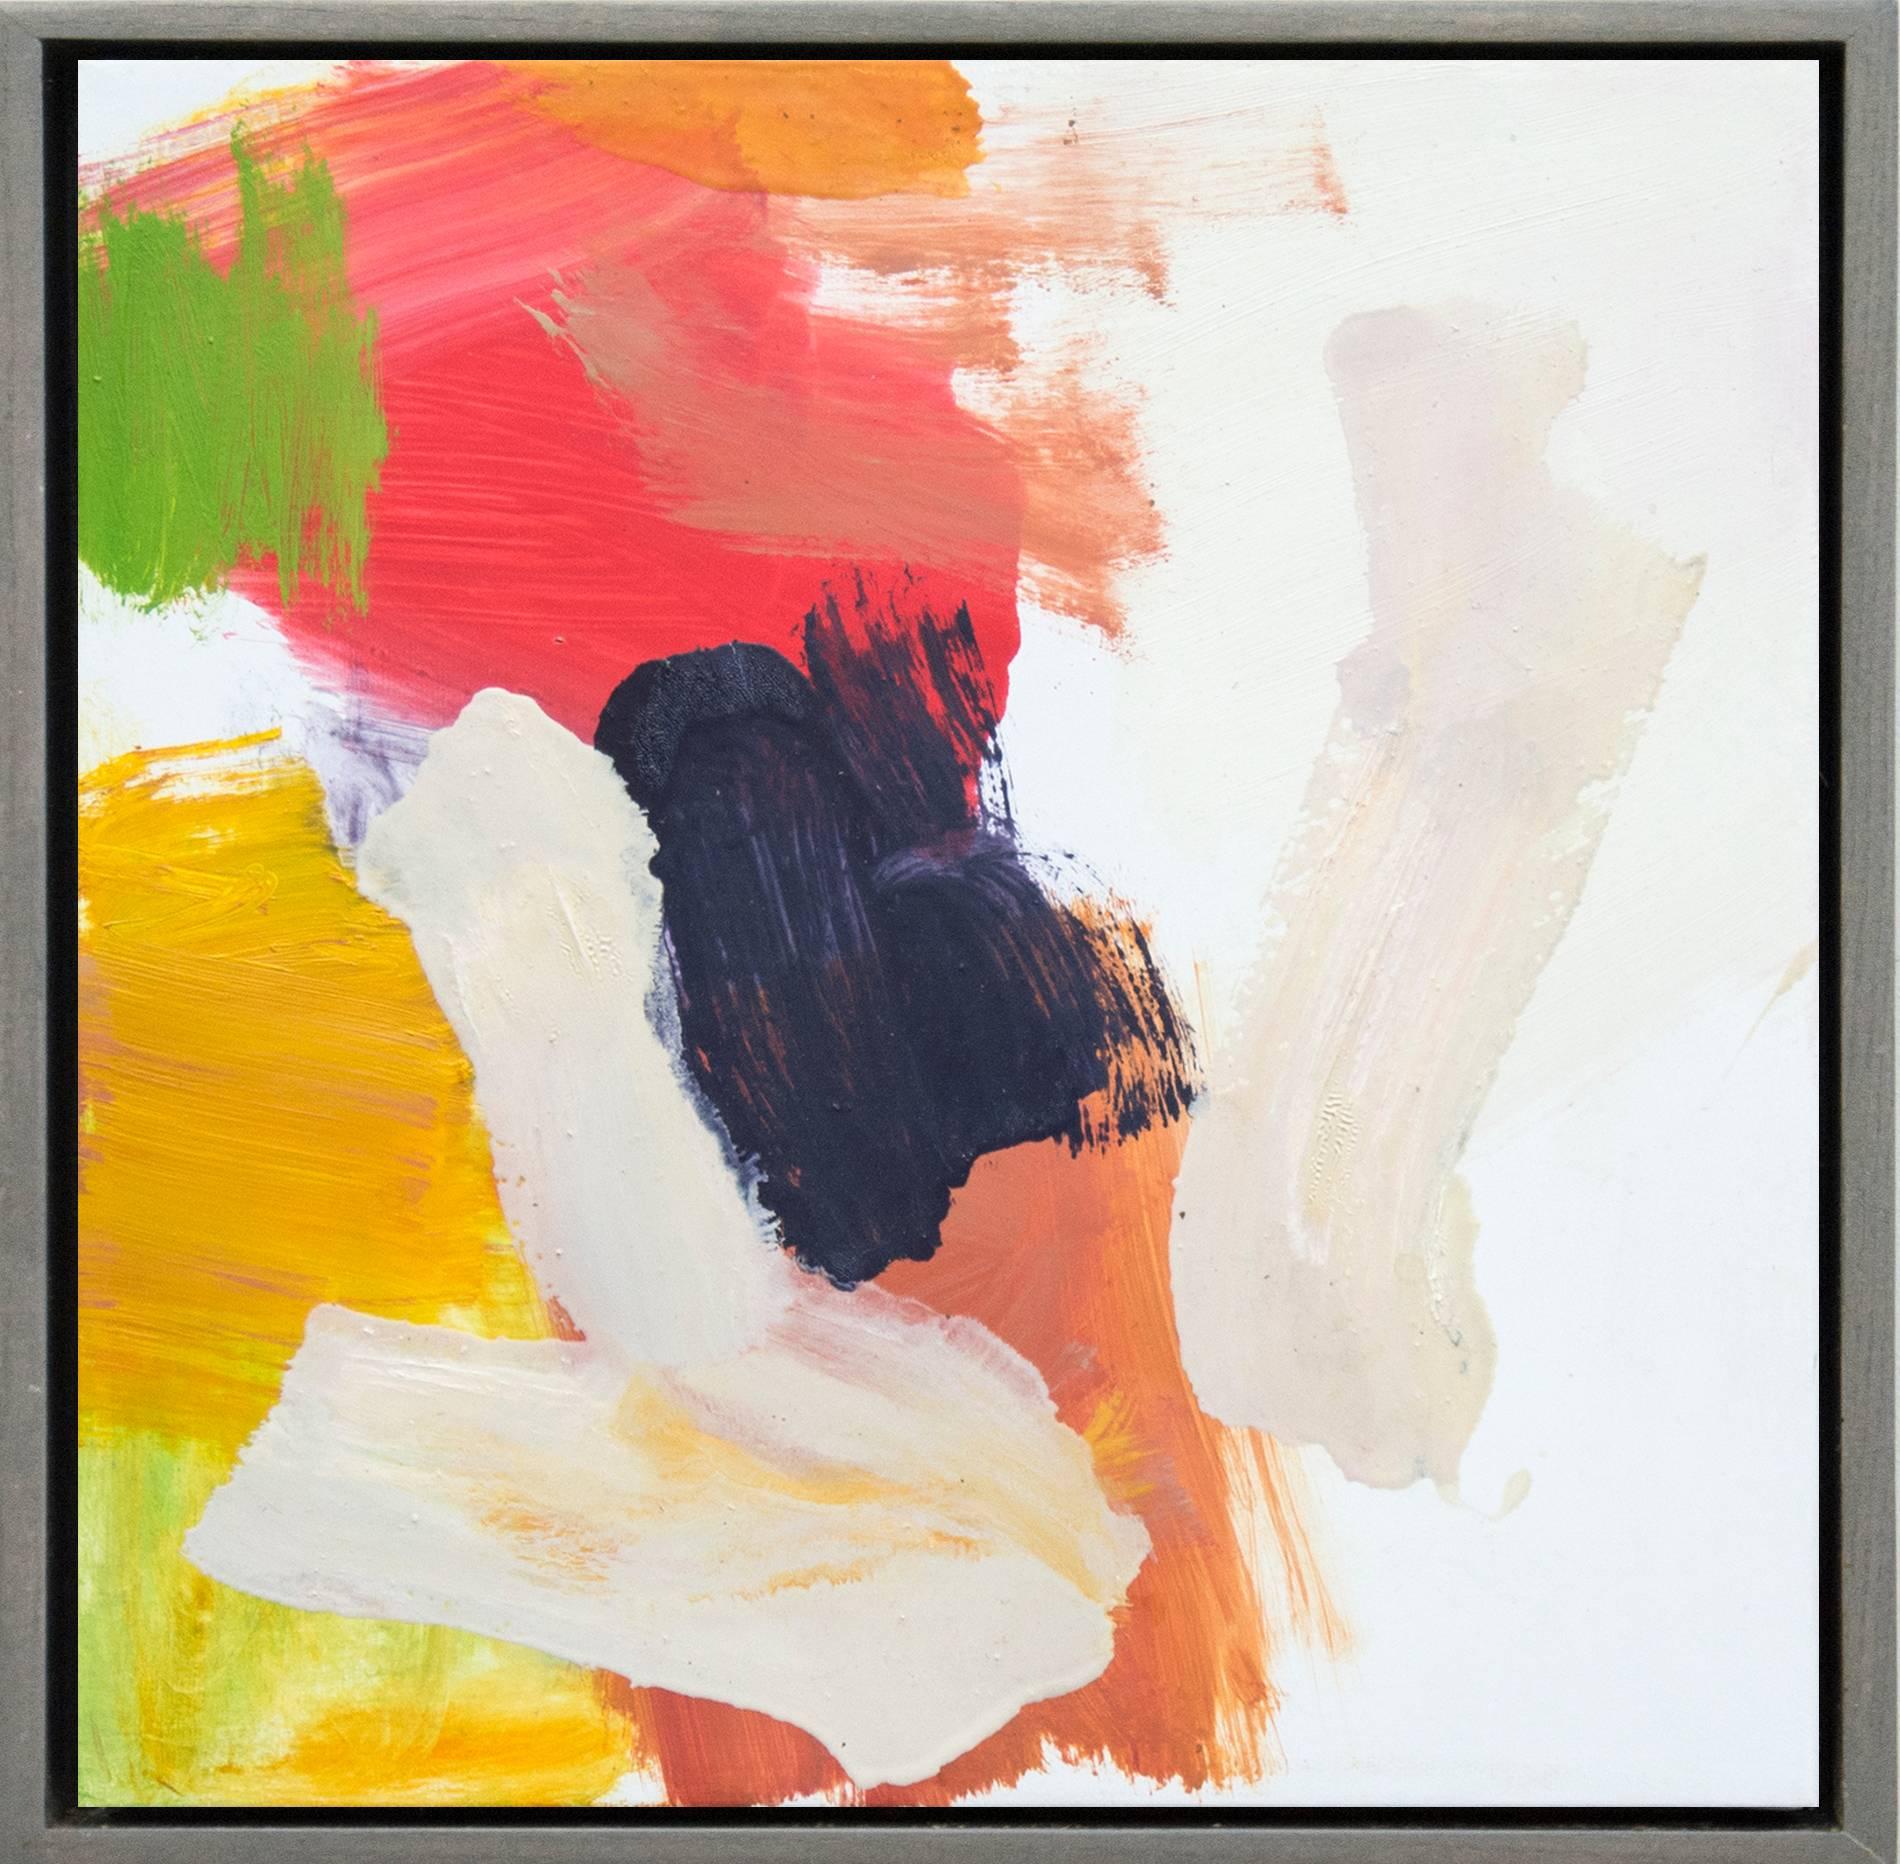 Scott Pattinson Abstract Painting - Kairoi No 26 - small, red, yellow, white, gestural abstract, oil on canvas